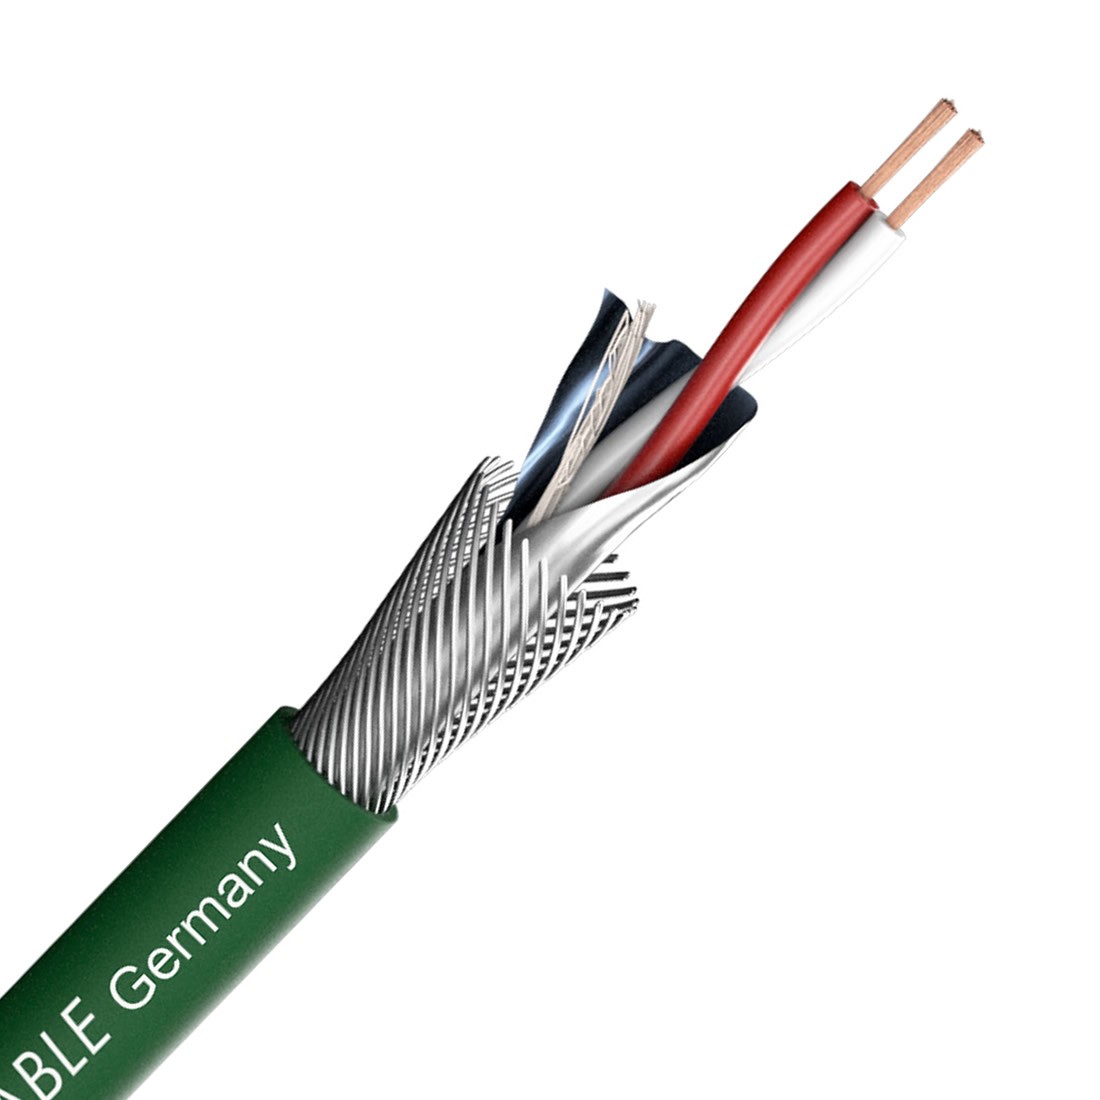 SOMMERCABLE ALBEDO Balanced Interconnect Cable 2 x 0,20 mm² Ø 5.2mm